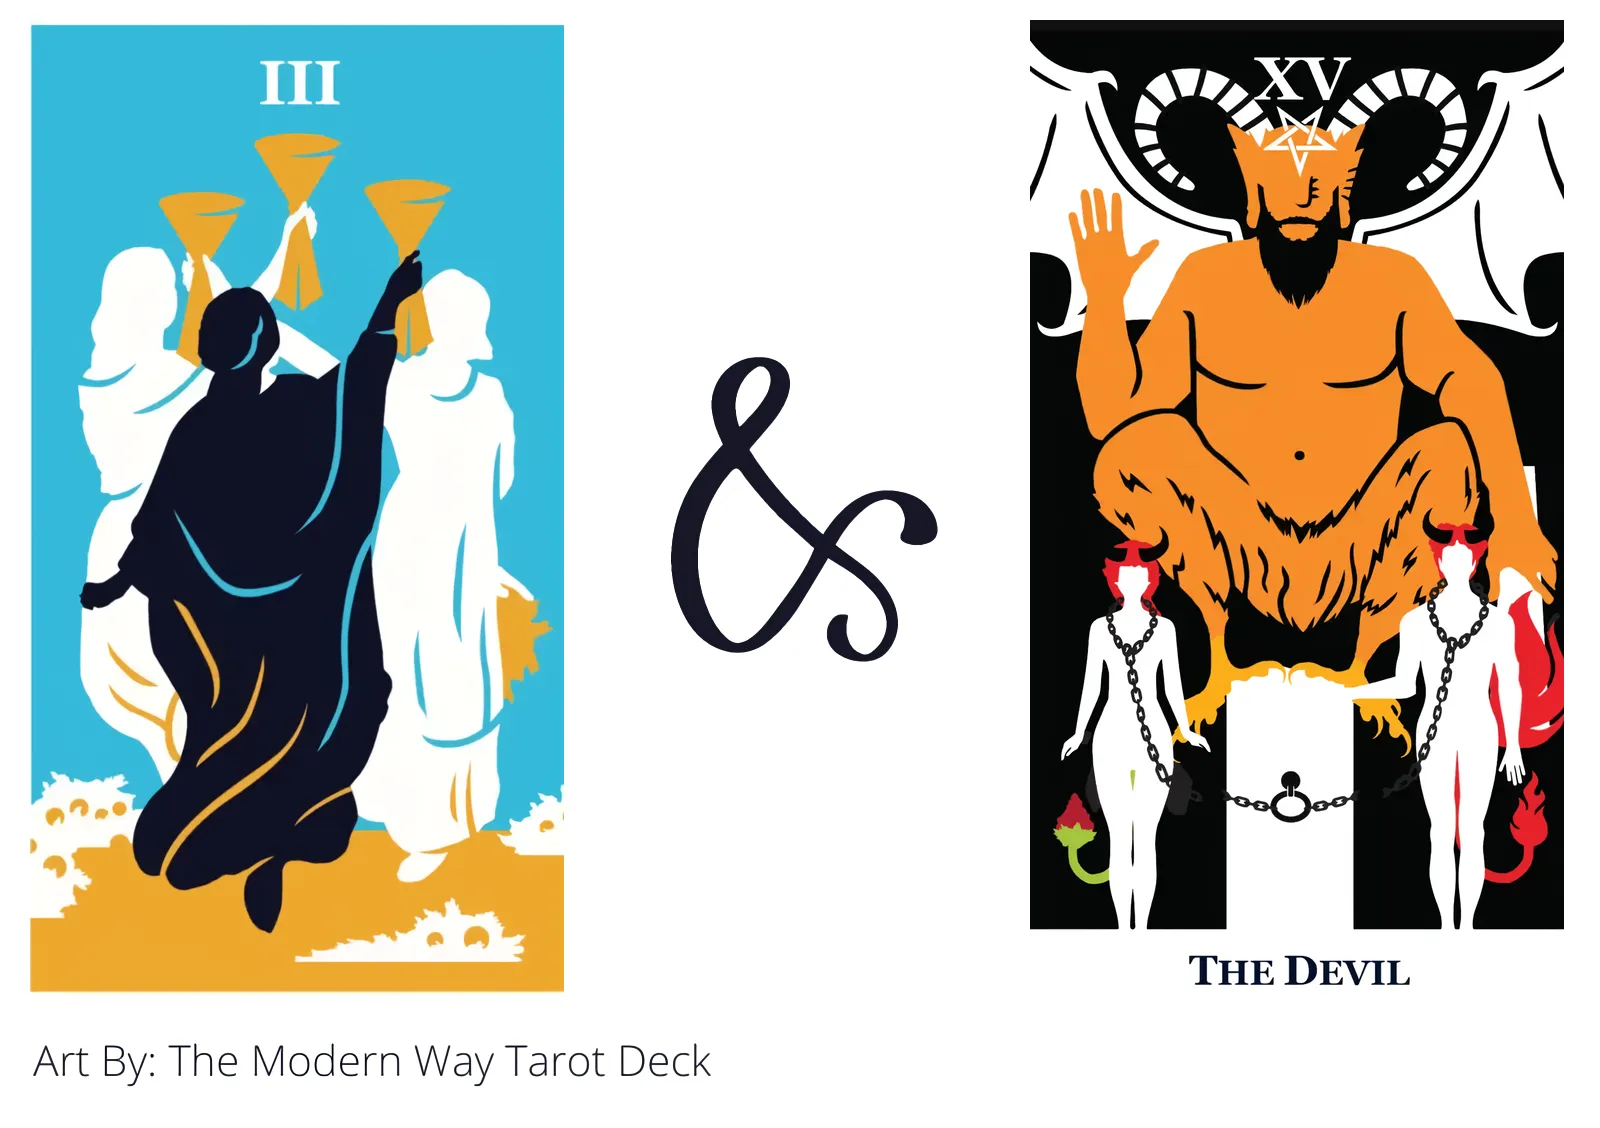 three of cups and the devil tarot cards together